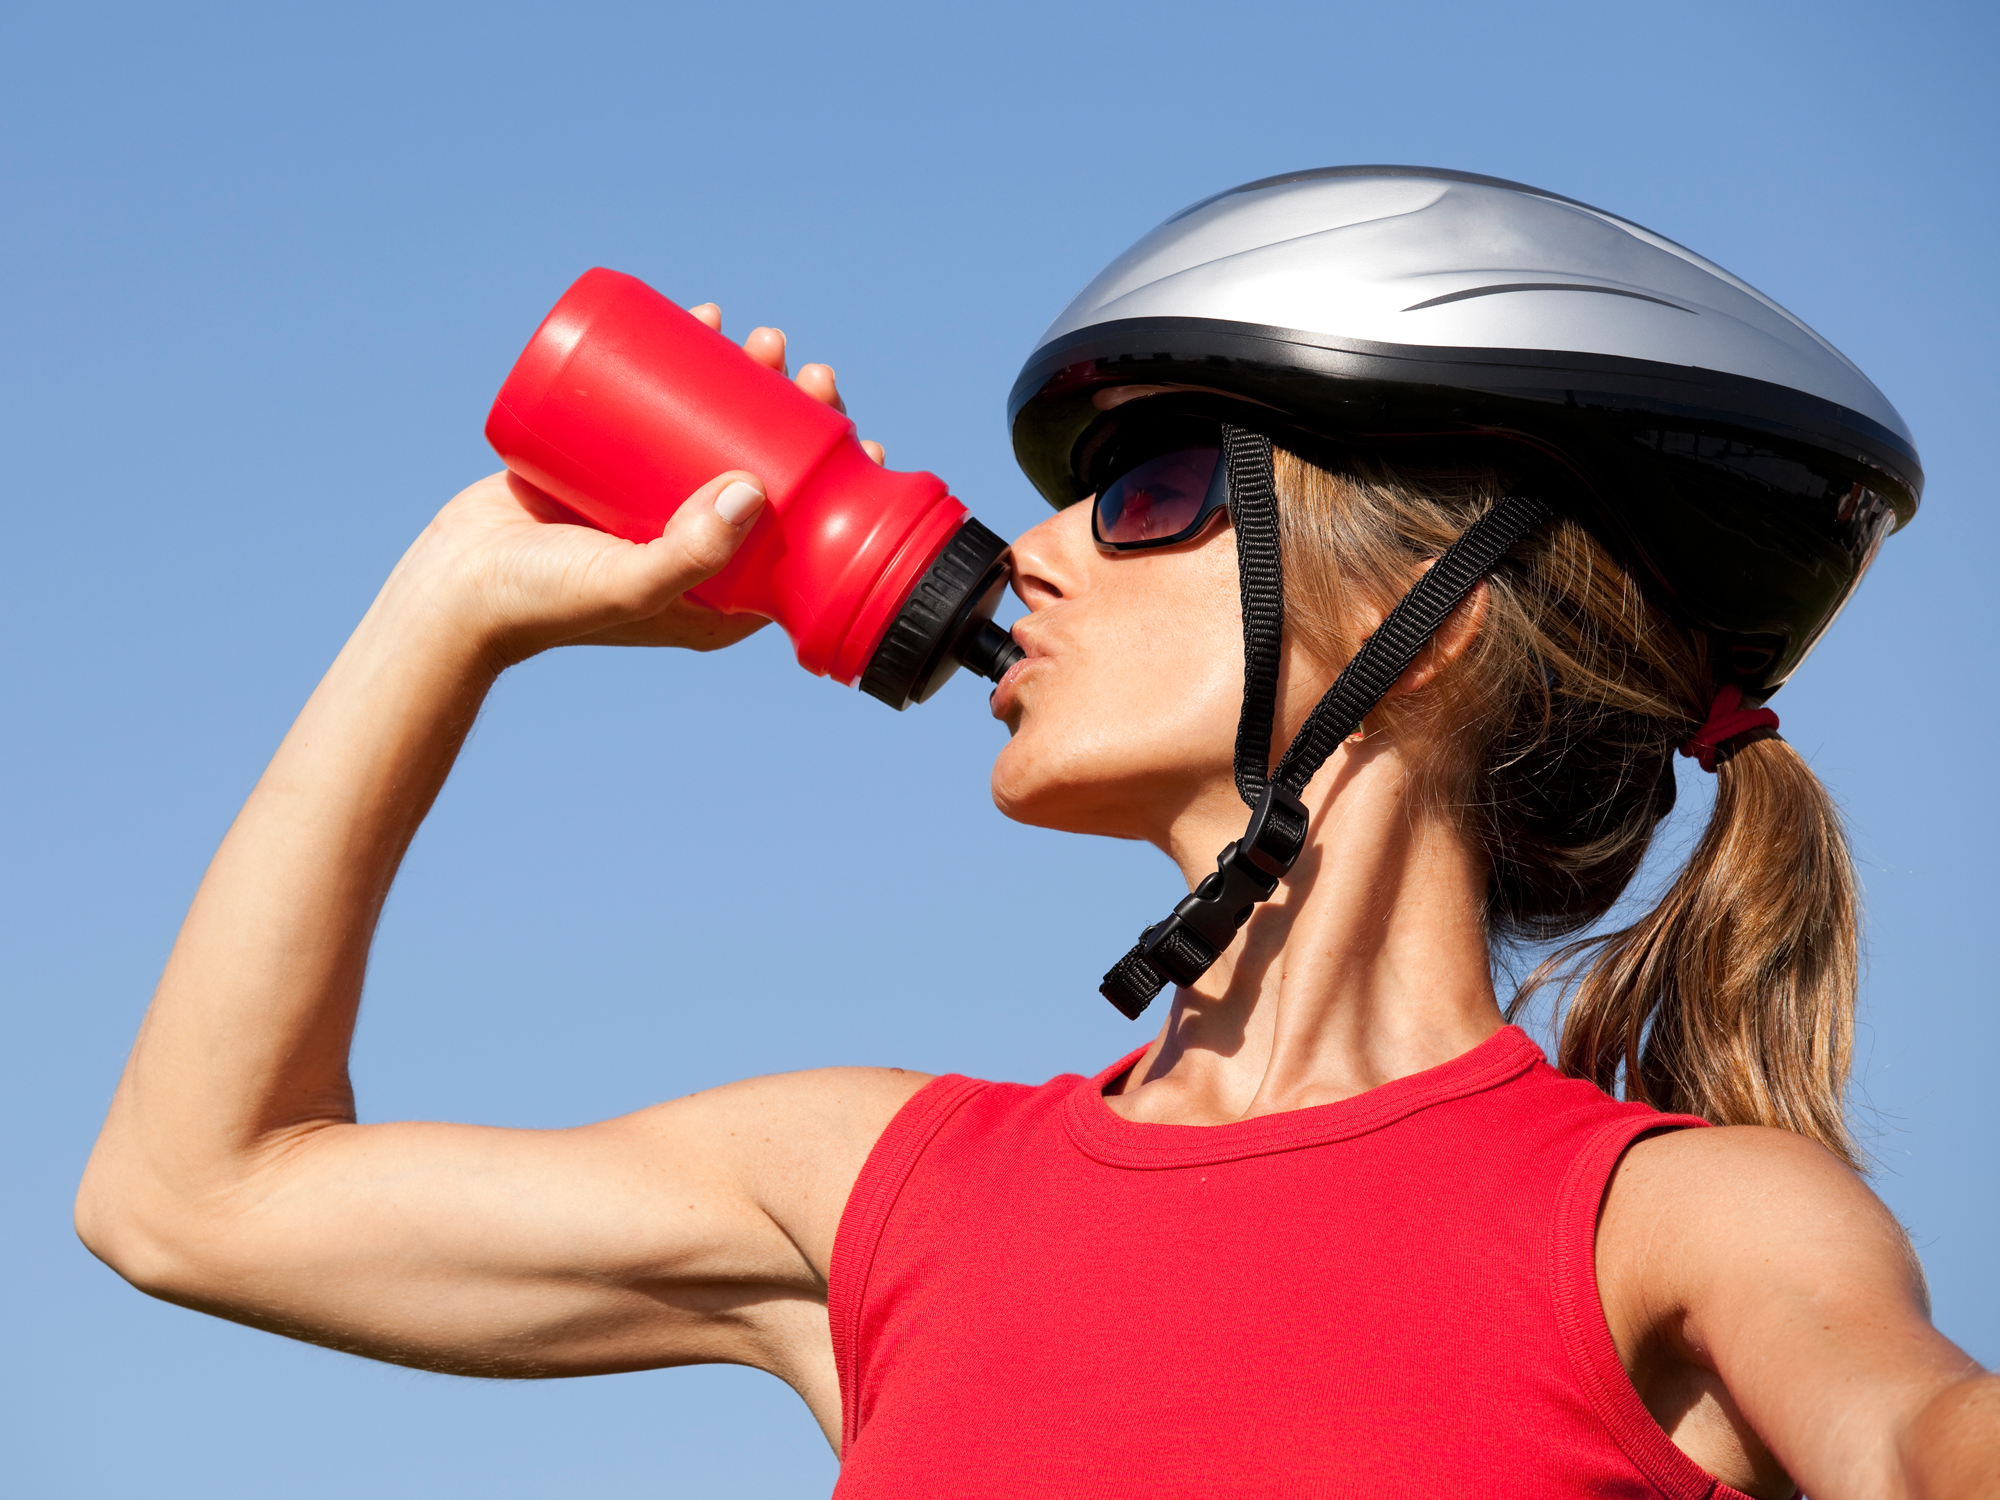 The pre-workout drink that beats brain aging